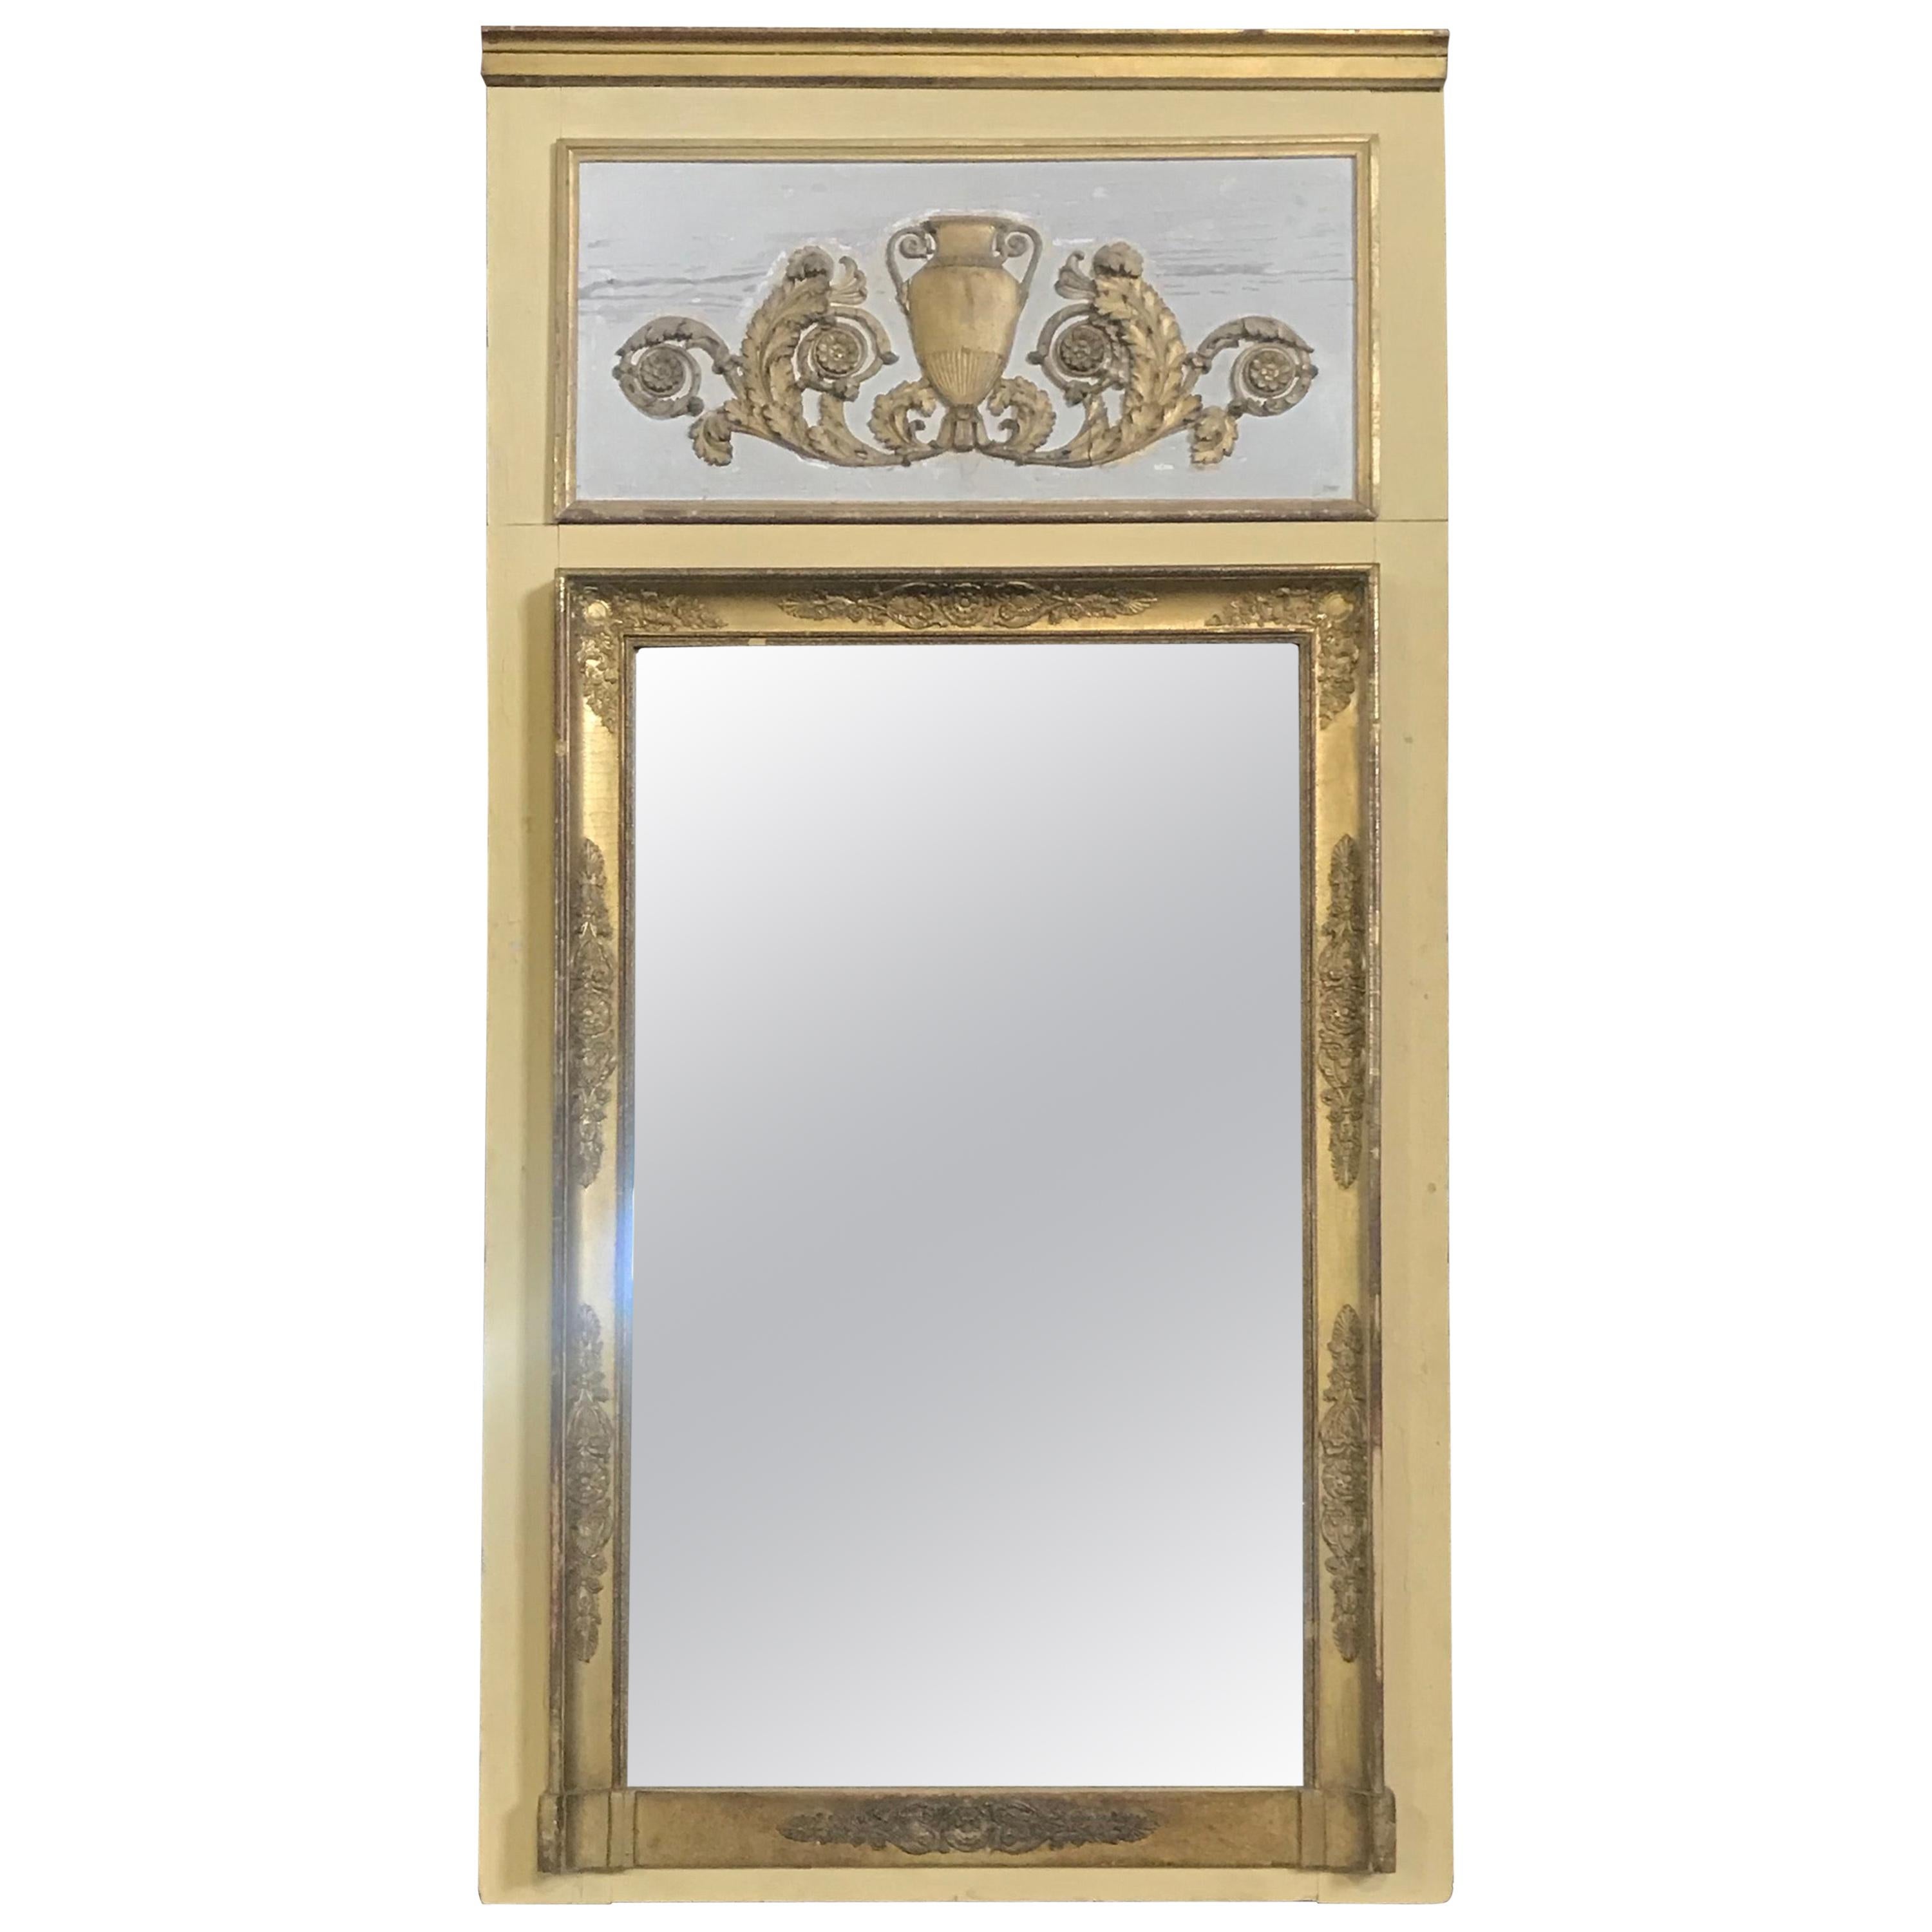 Romantic 19th Century Trumeau Mirror with Gold Gilt Frame